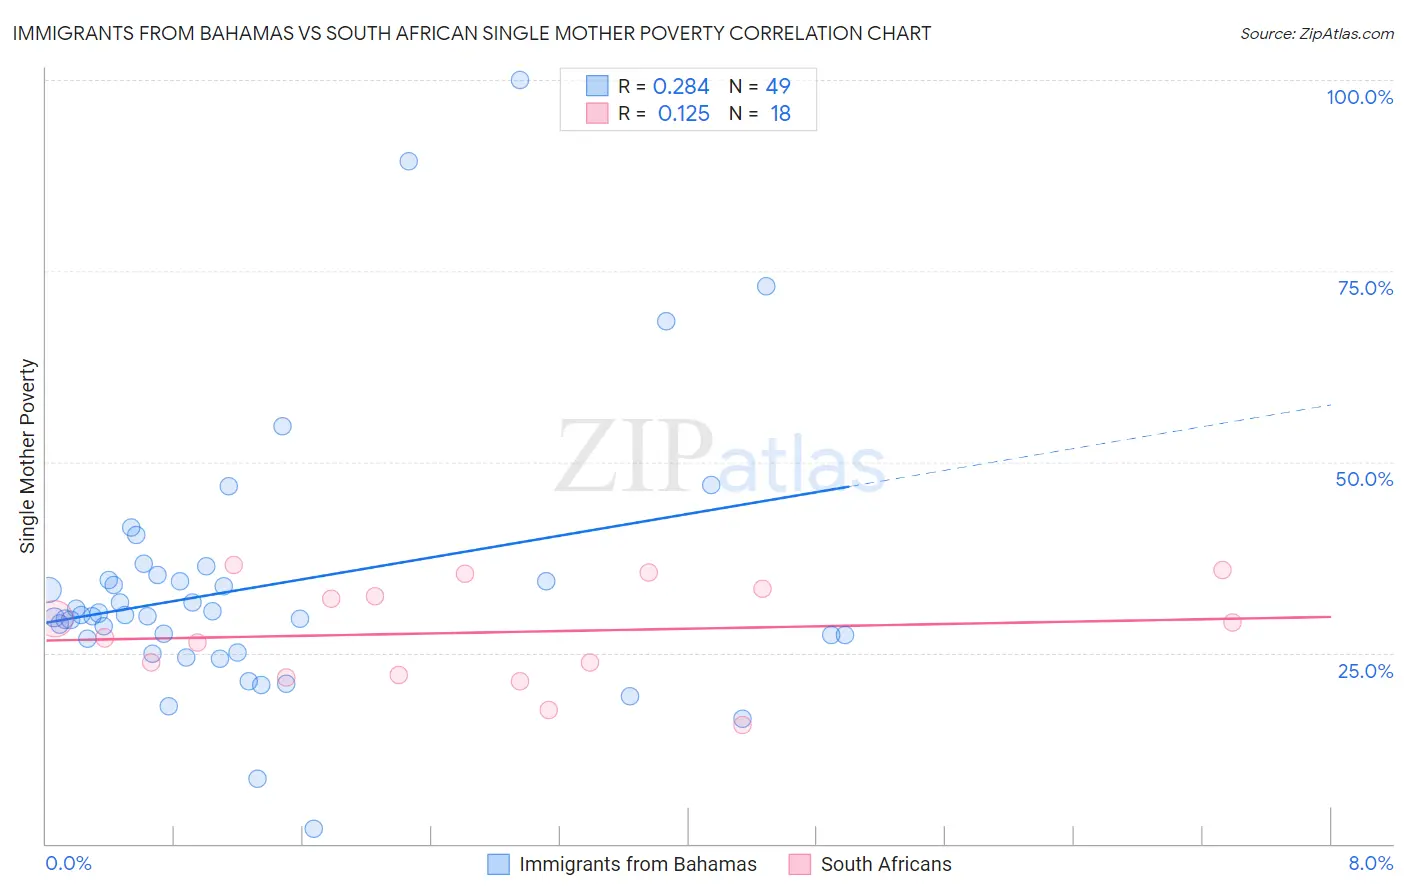 Immigrants from Bahamas vs South African Single Mother Poverty